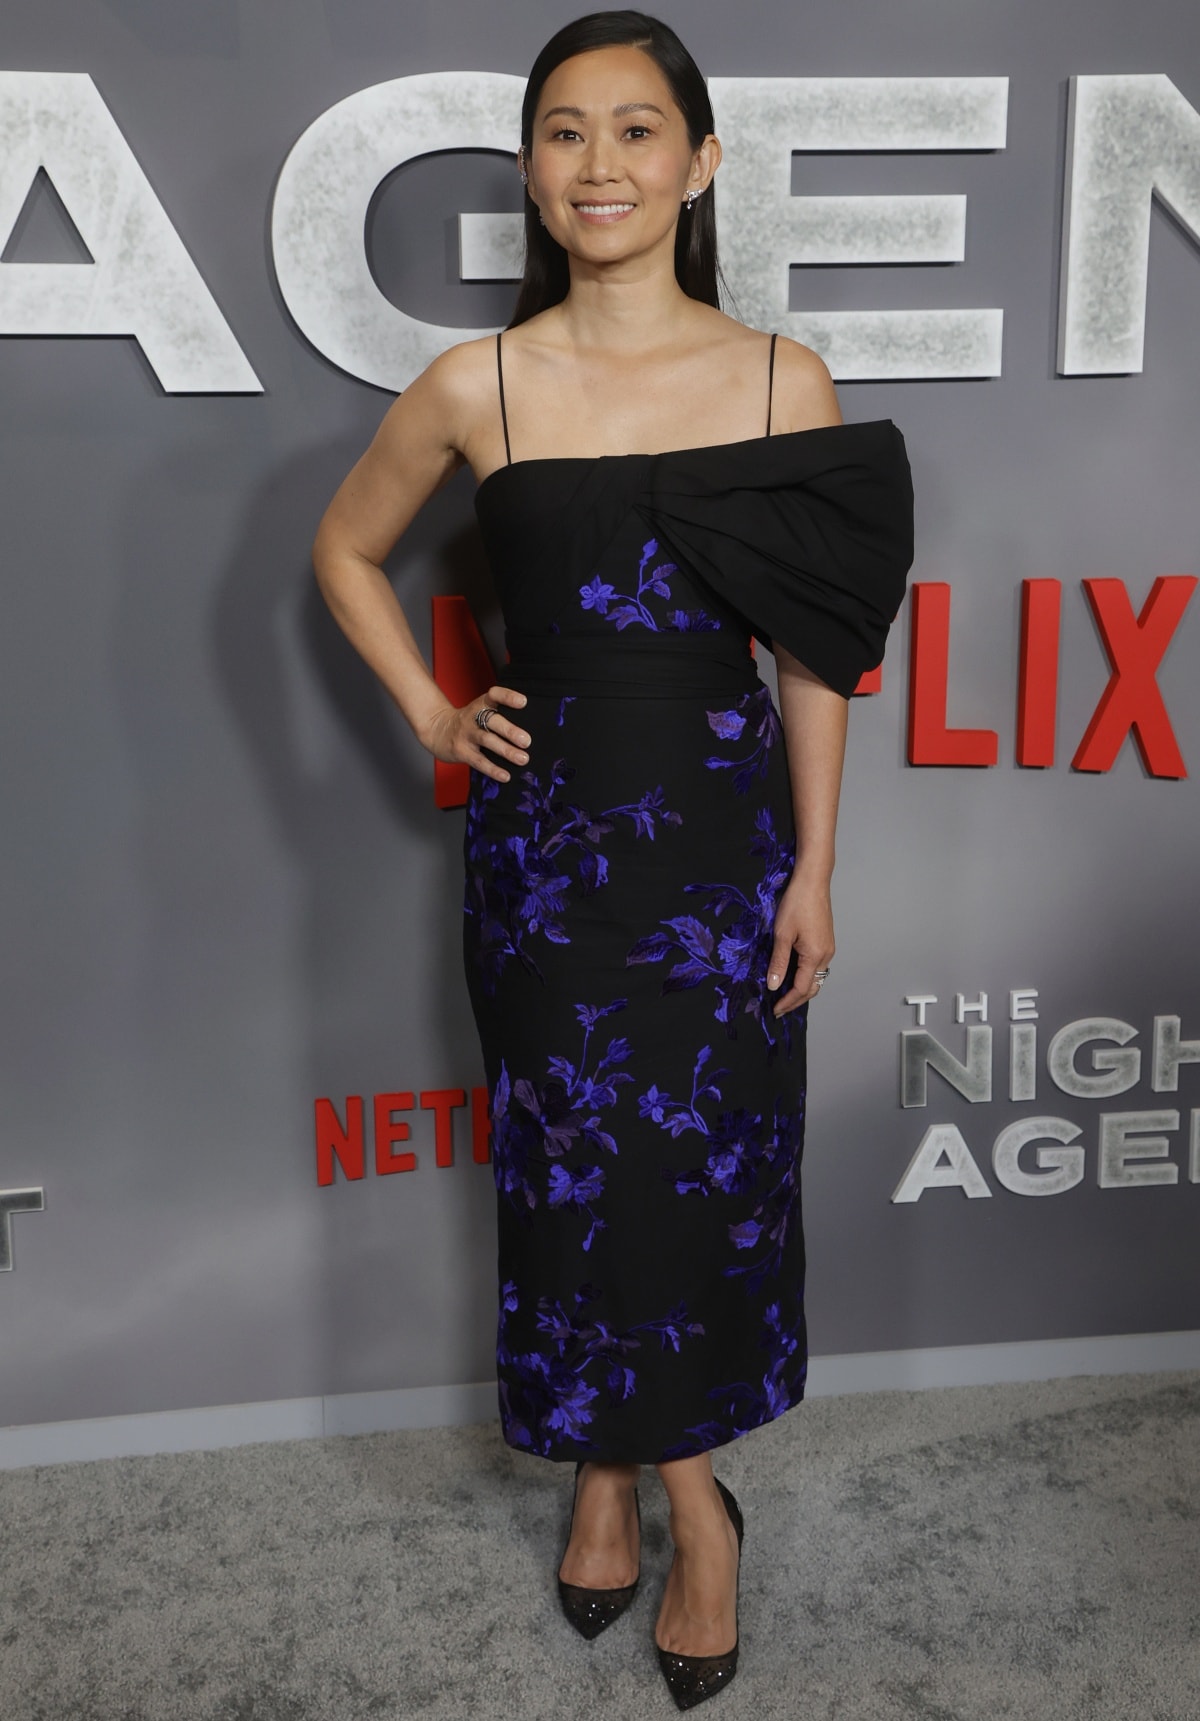 Hong Chau attending the Los Angeles premiere of The Night Agent